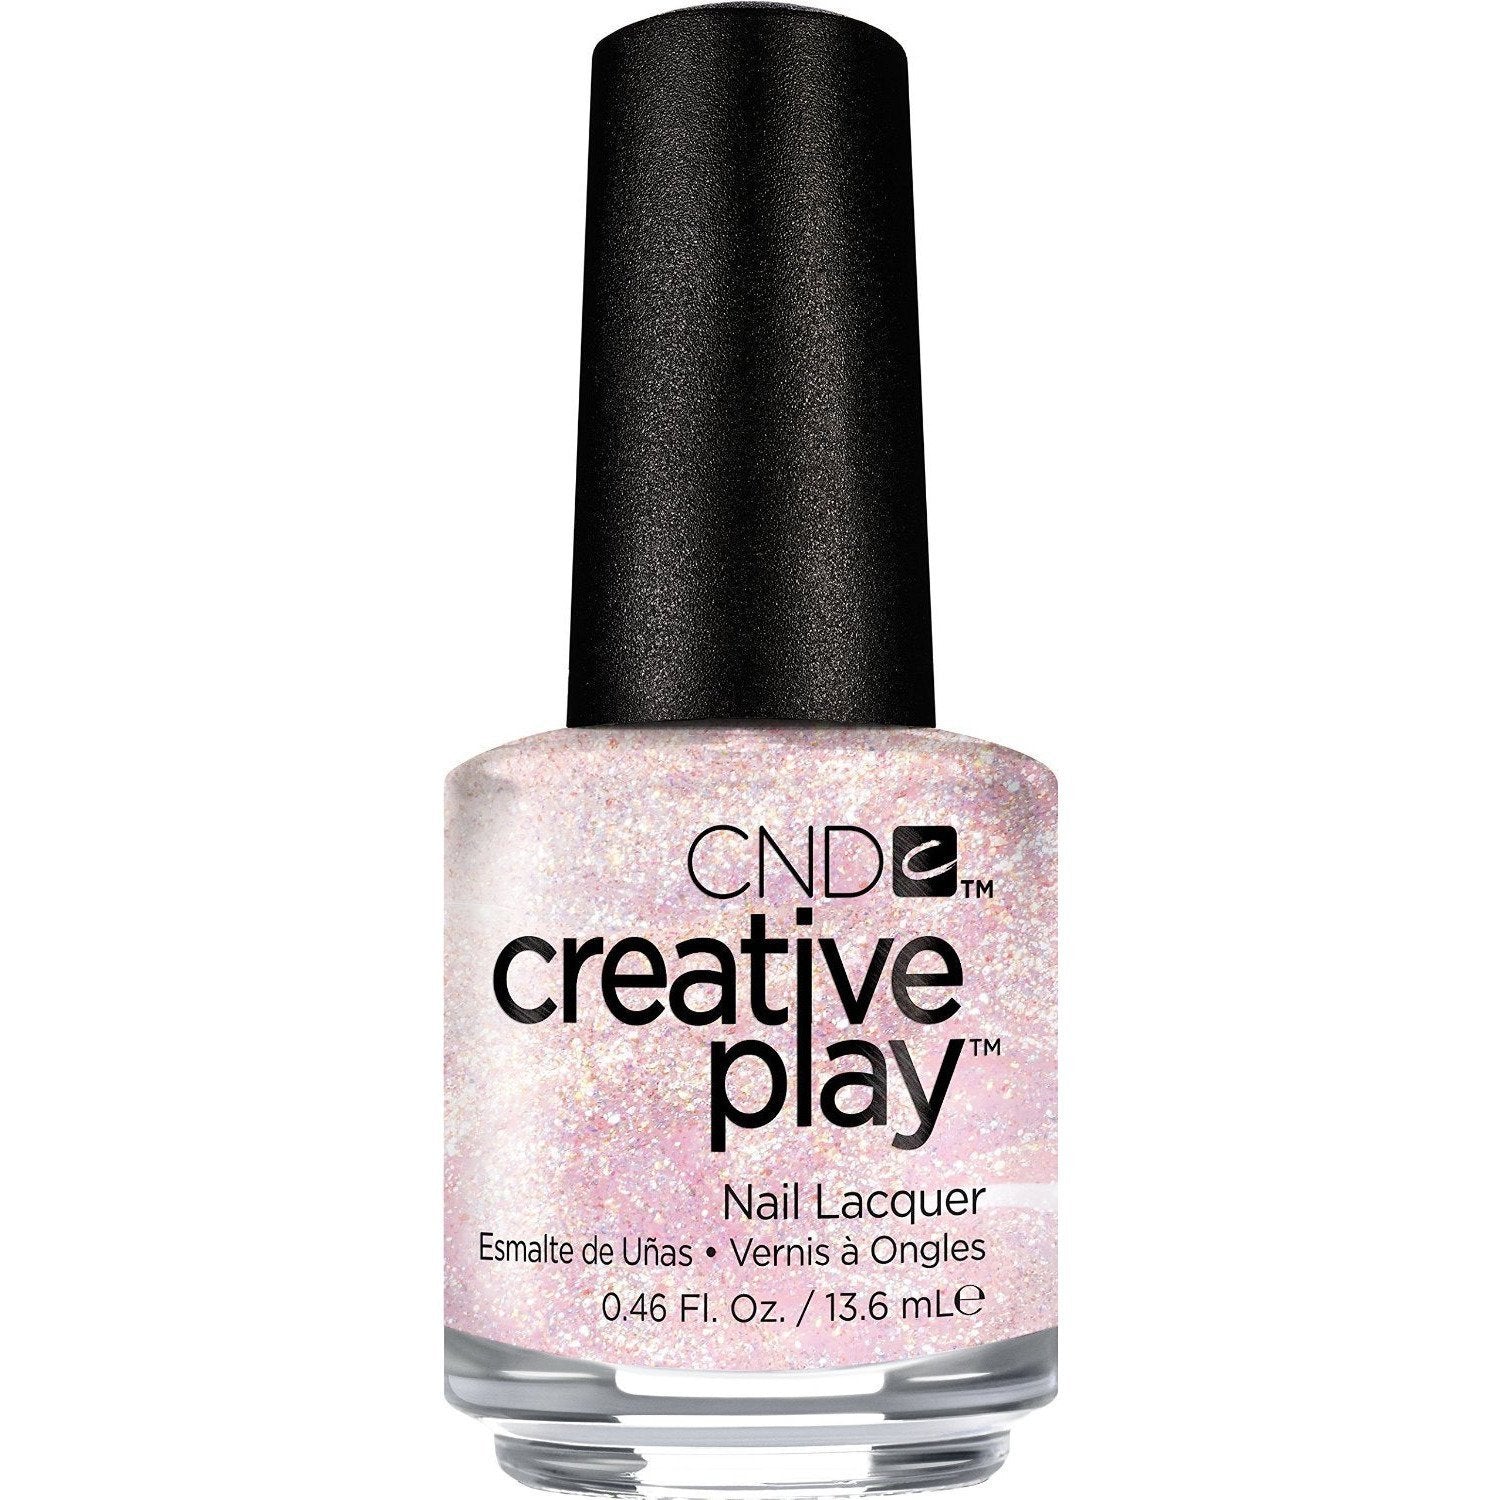 CND Creative Play Nail Polish - Tutu Be or Not To Be | CND - CM Nails & Beauty Supply